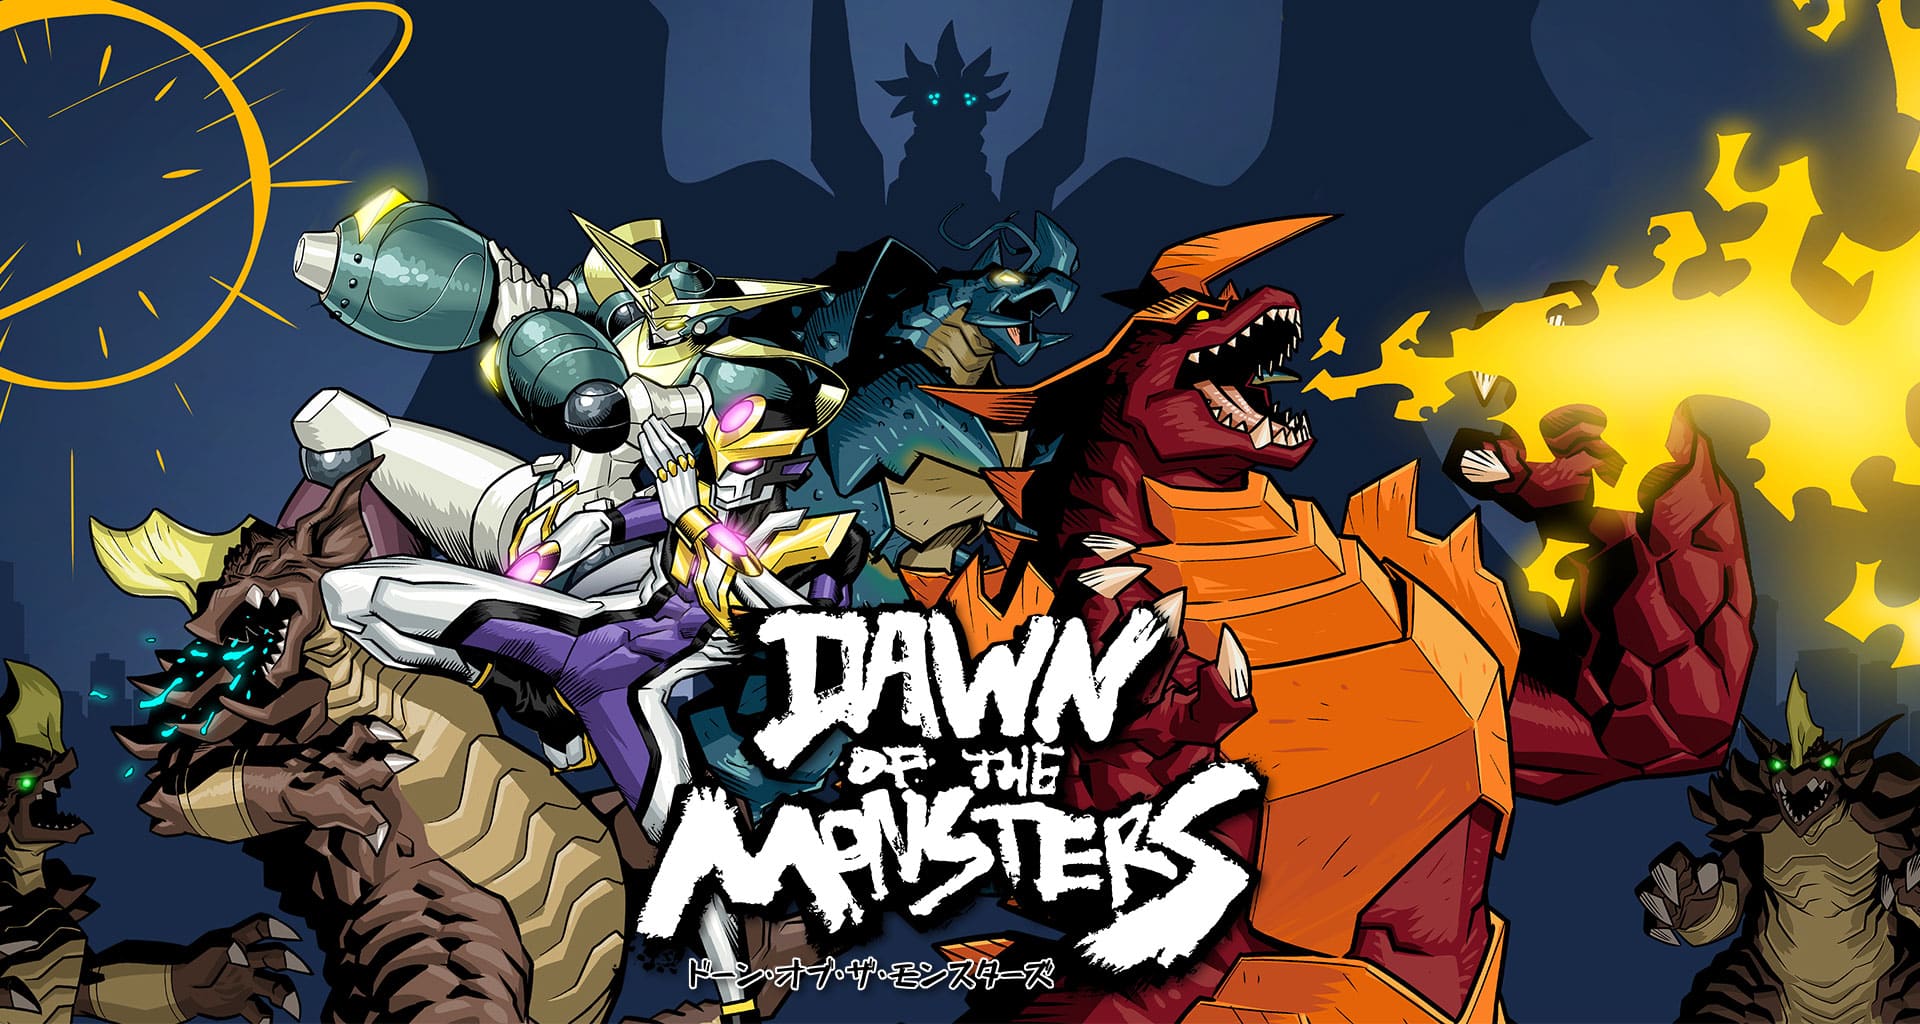 dawn of the monsters update 1.02